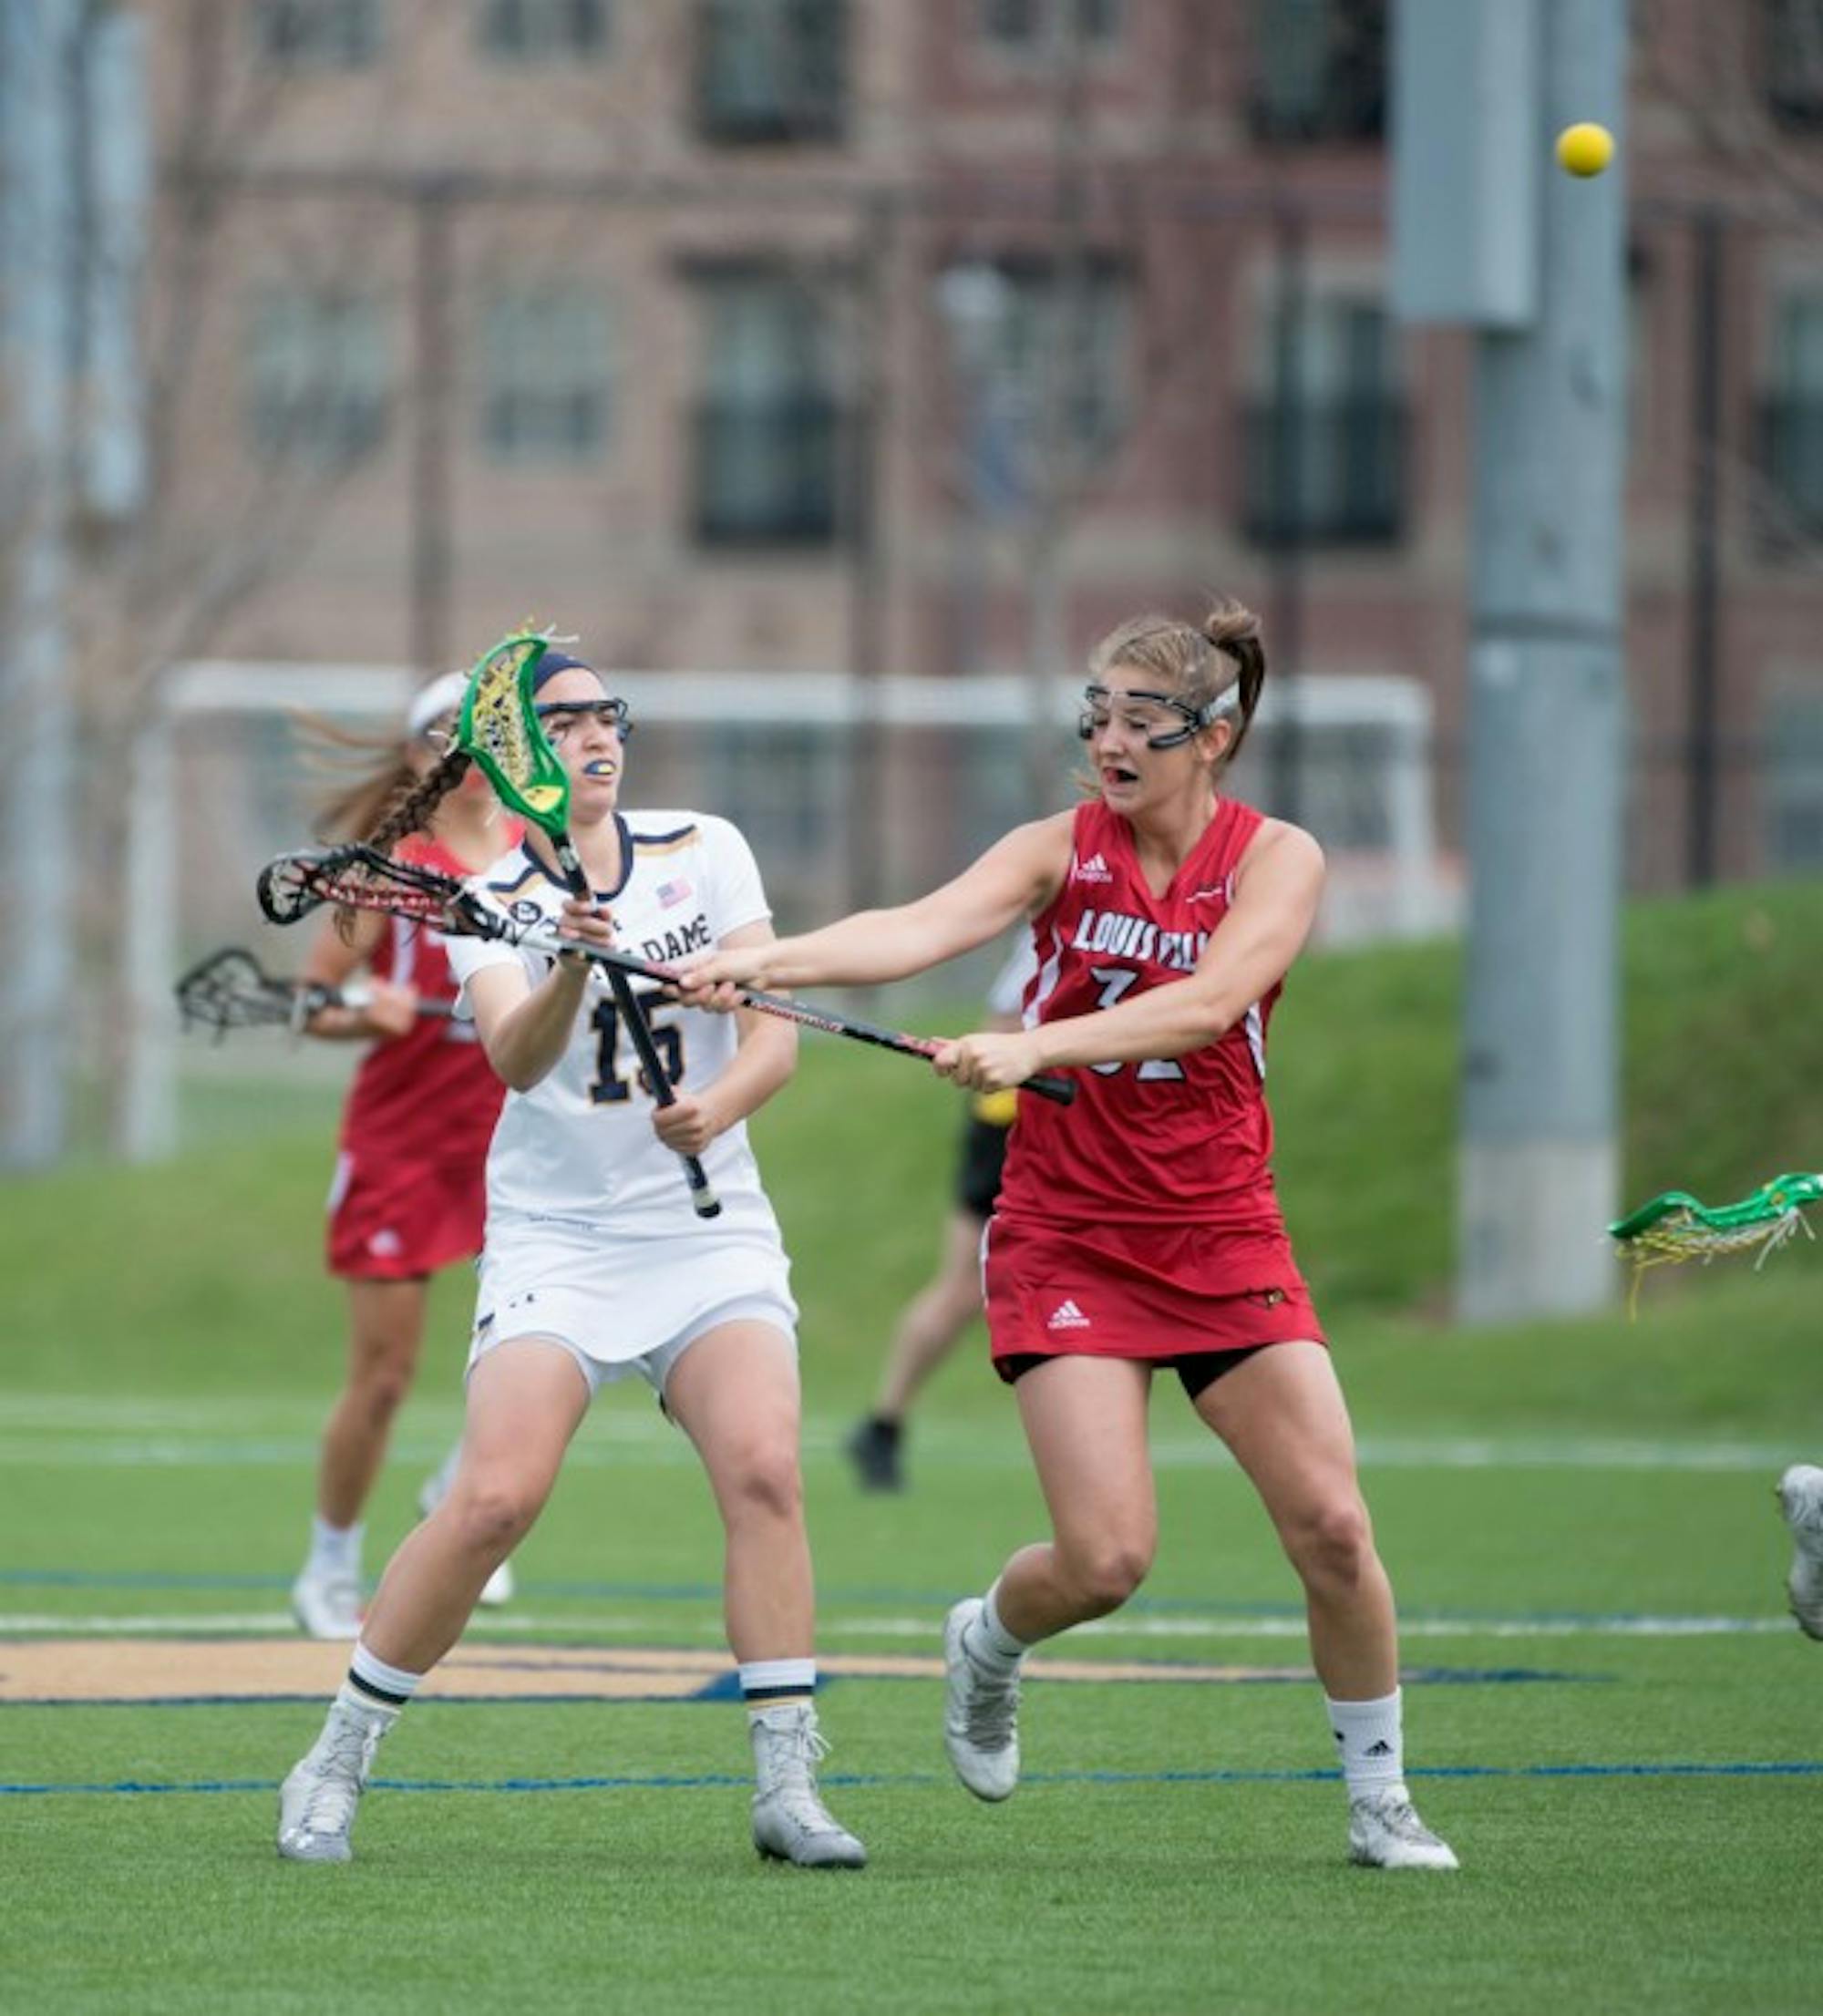 Irish sophomore attack Cortney Fortunato is pressured while passing during a 10-8 loss to Louisville at Arlotta Stadium on April 19.